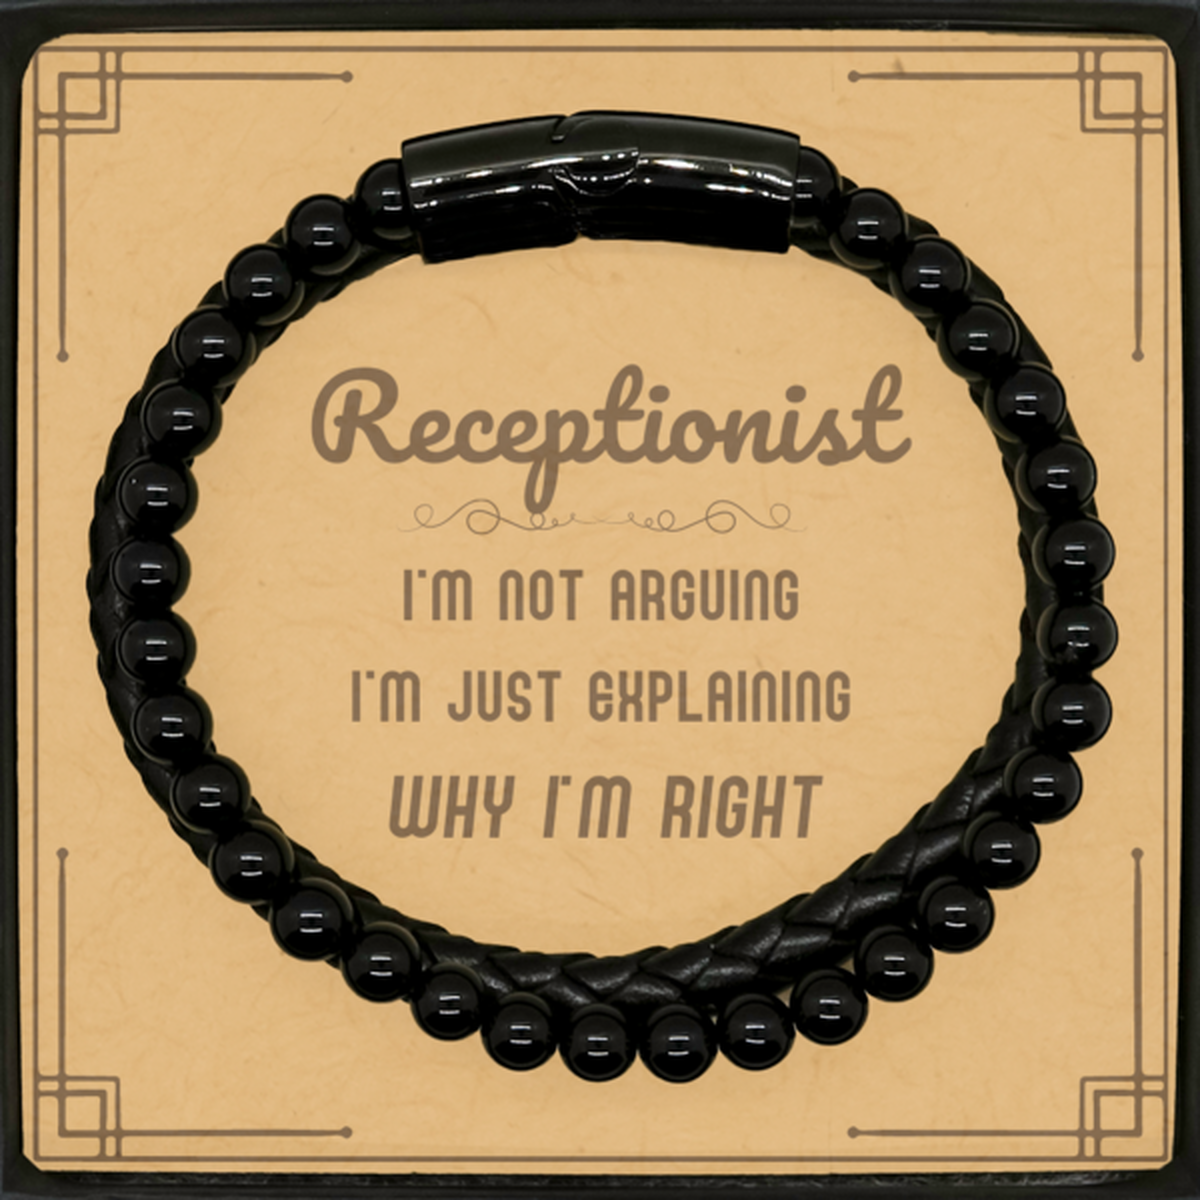 Receptionist I'm not Arguing. I'm Just Explaining Why I'm RIGHT Stone Leather Bracelets, Funny Saying Quote Receptionist Gifts For Receptionist Message Card Graduation Birthday Christmas Gifts for Men Women Coworker